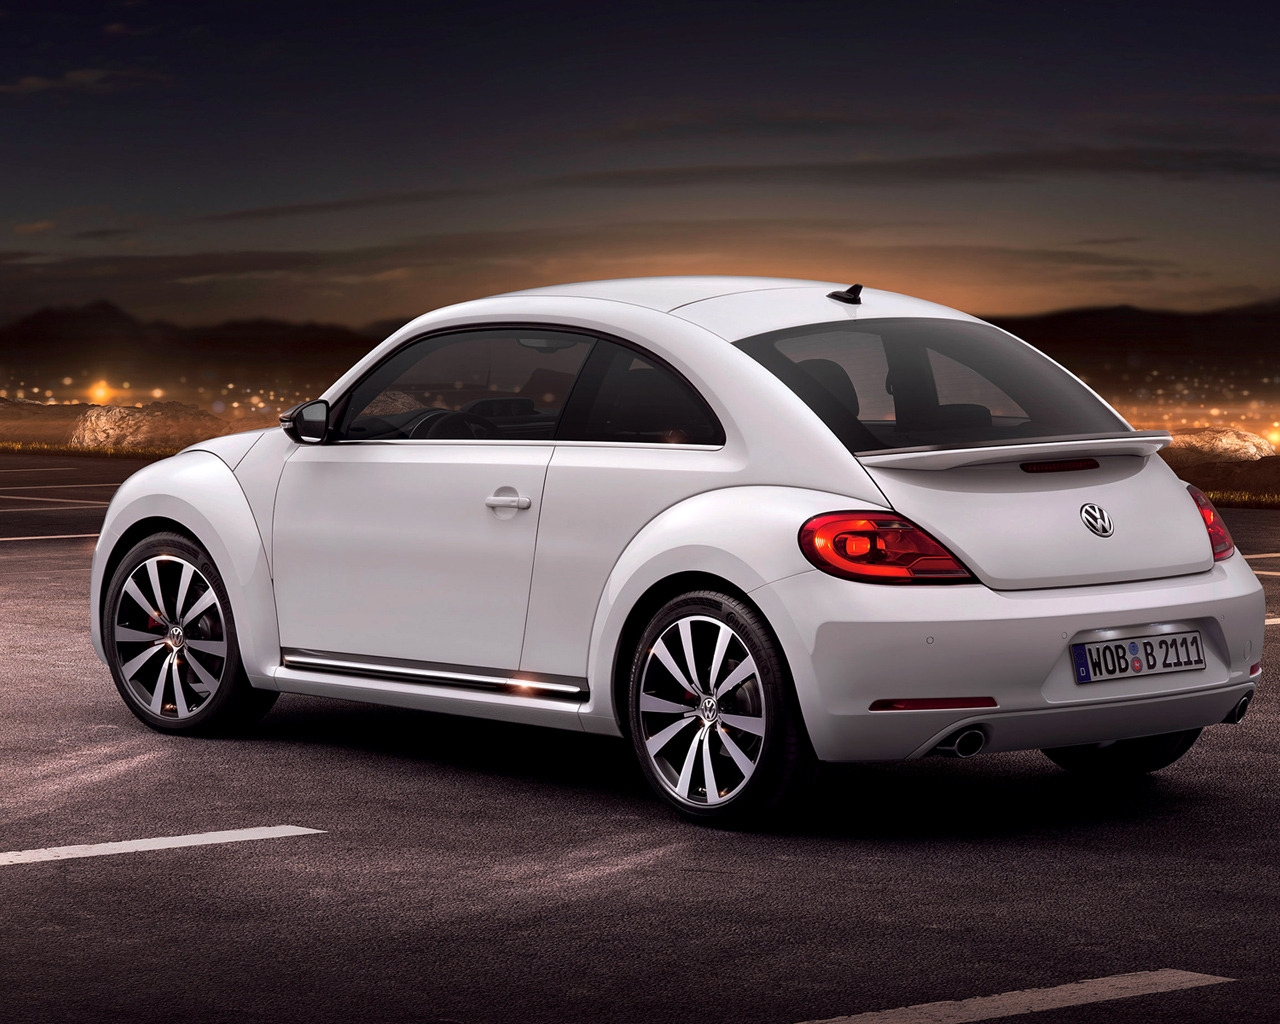 2012 VW Beetle for 1280 x 1024 resolution